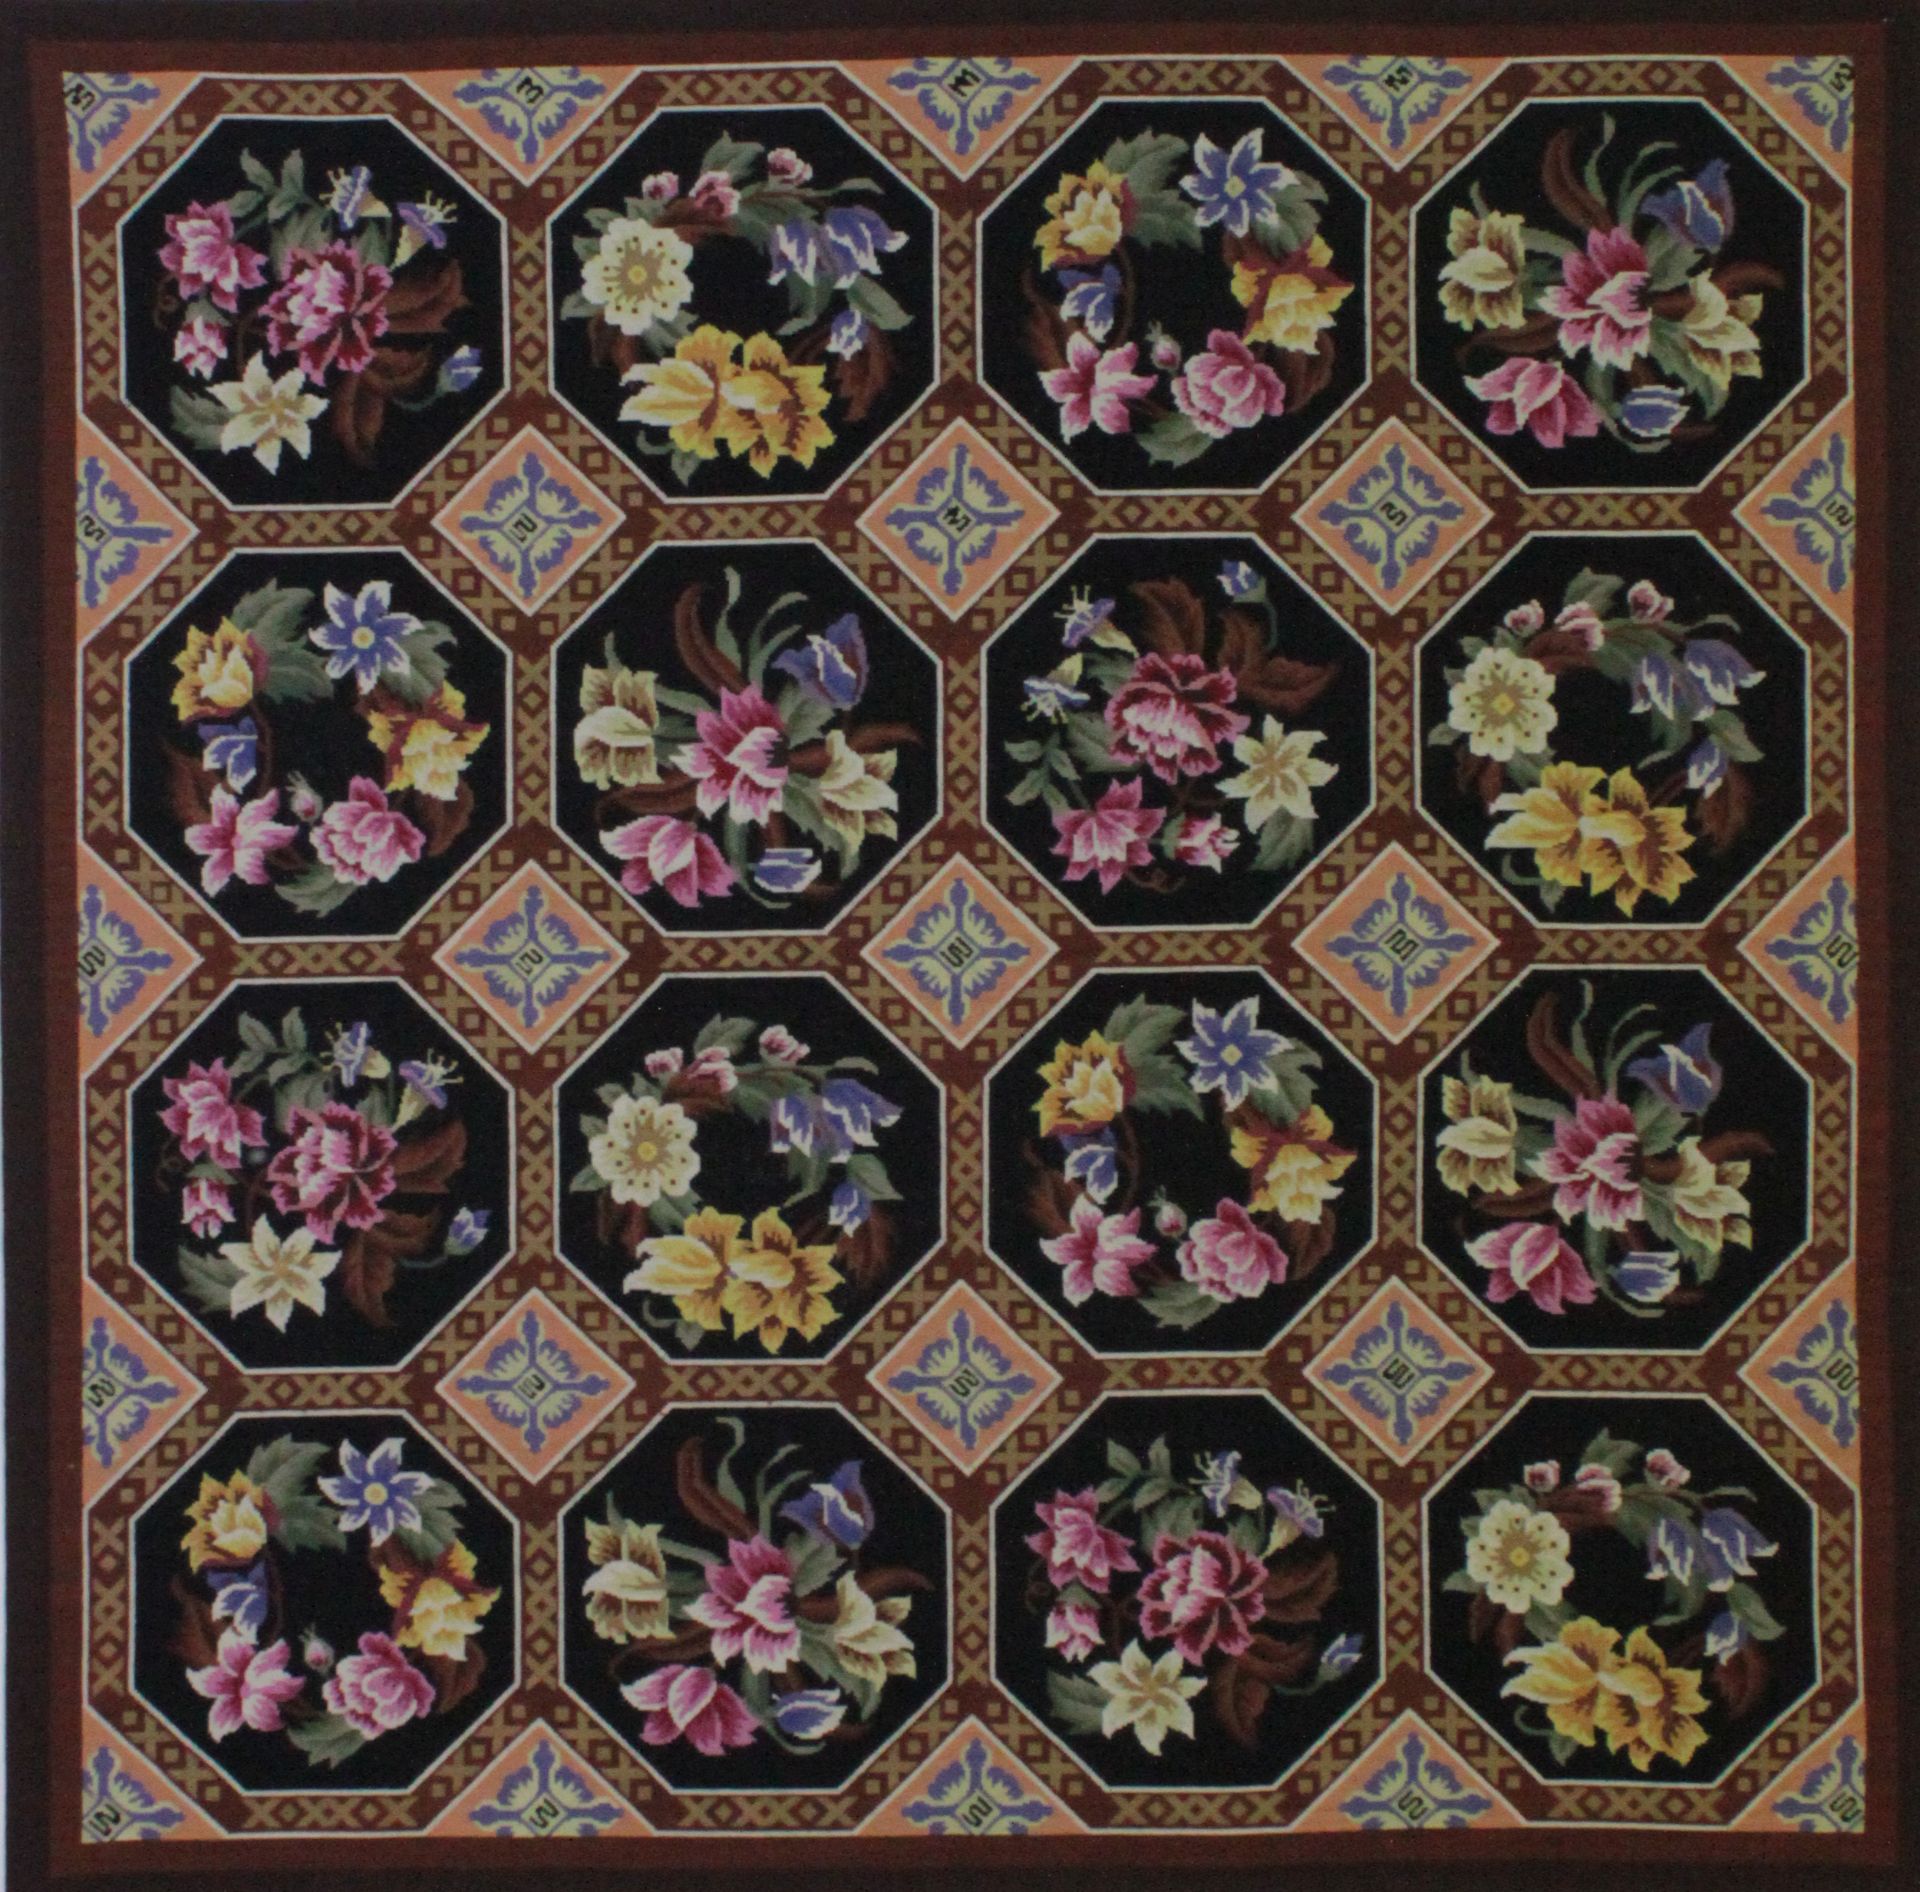 TAPESTRY China - 183 x 181 cm - Image 2 of 5